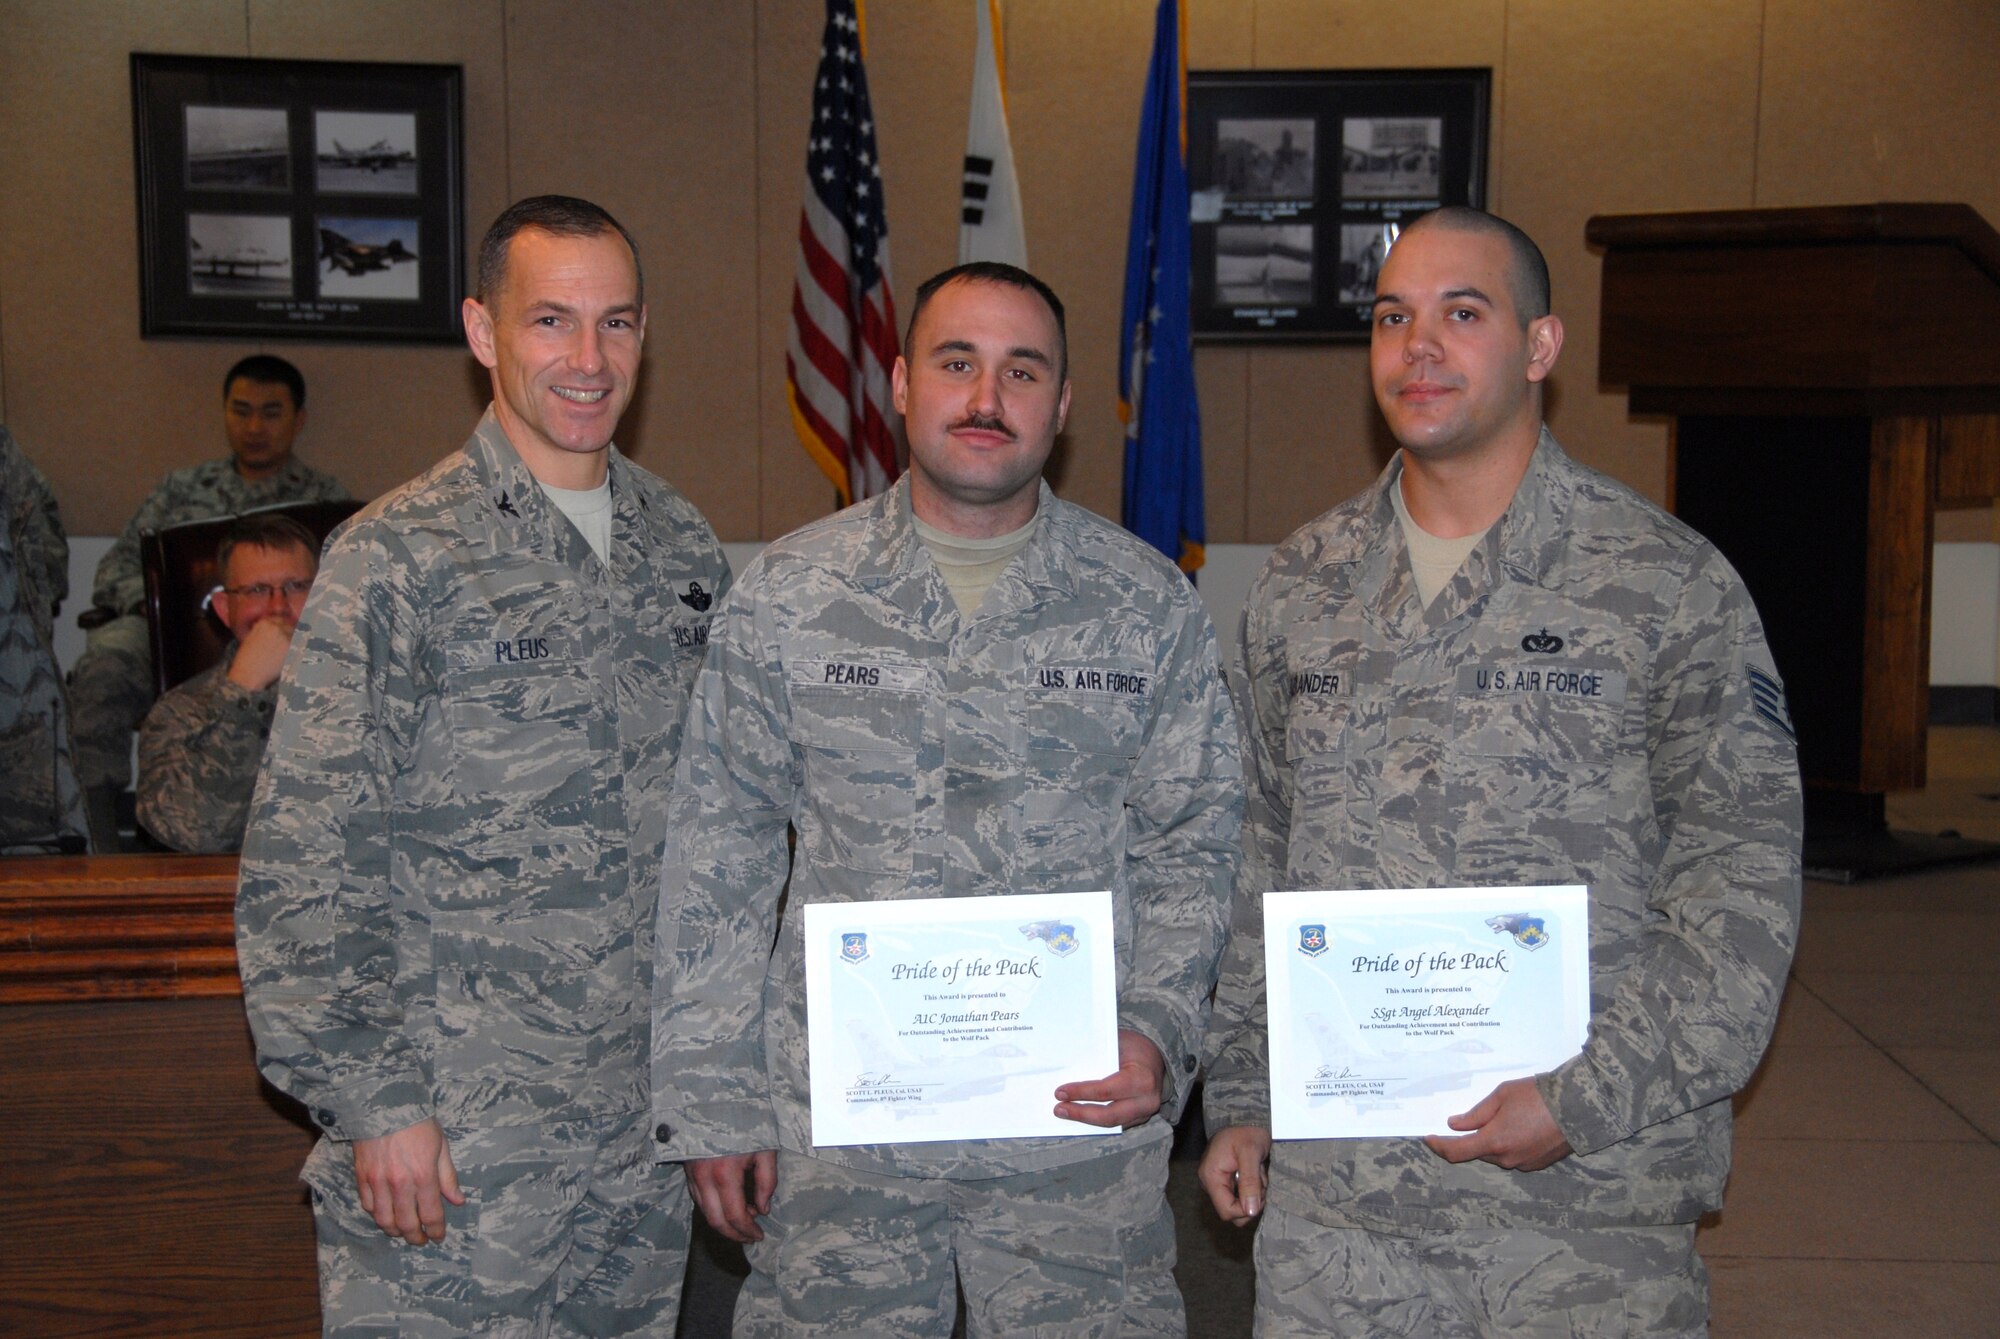 Col. Col Scott L. Pleus, 8th Fighter Wing commander, presents Airman 1st Class Jonathan Pears (middle) and Staff Sgt. Alexander Angel, 8th Civil Engineer Squadron heating, ventilation, air conditioning and refrigeration technicians, with Kunsan’s Pride of the Pack, which recognizes the outstand work Airmen do every day. (U.S. Air Force photo by Capt. Omar Villarreal/ Released) 